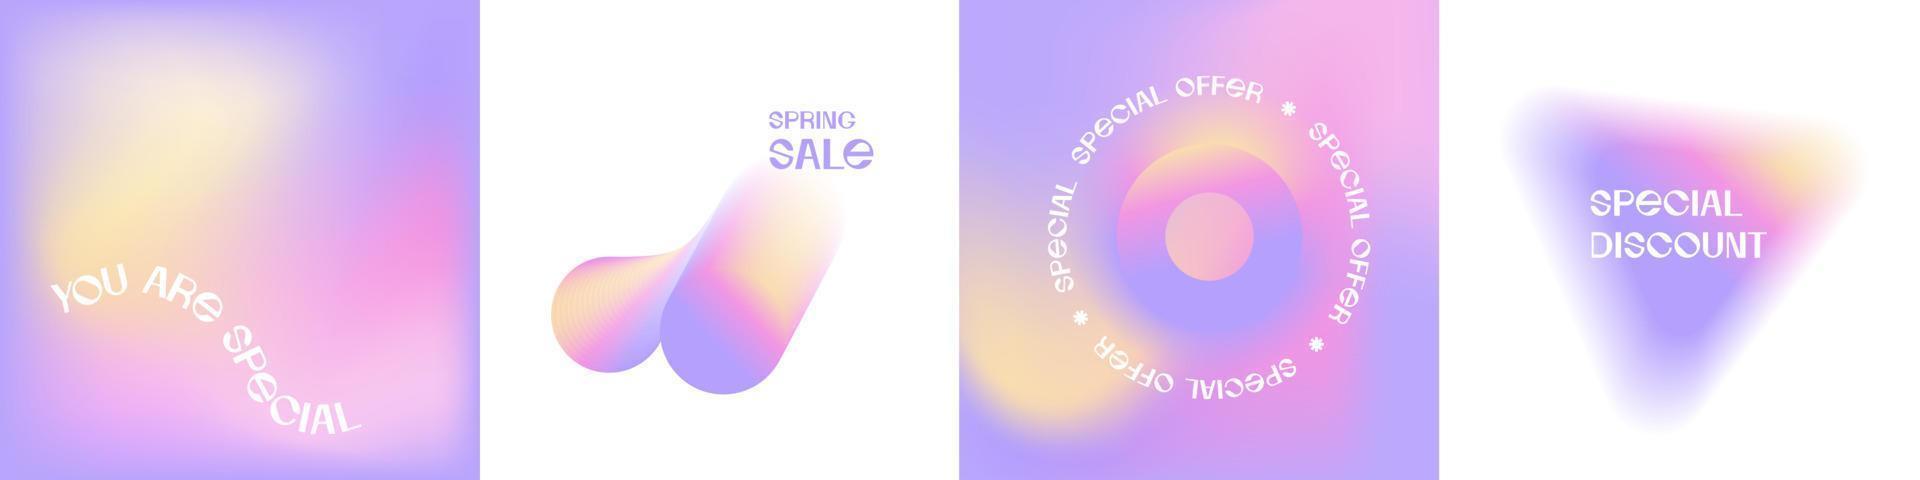 Set of trendy blur gradient social media sale covers template. Vintage y2k pastel color banners collection for spring special business discount. Minimalist blurred abstract store promotion poster. vector